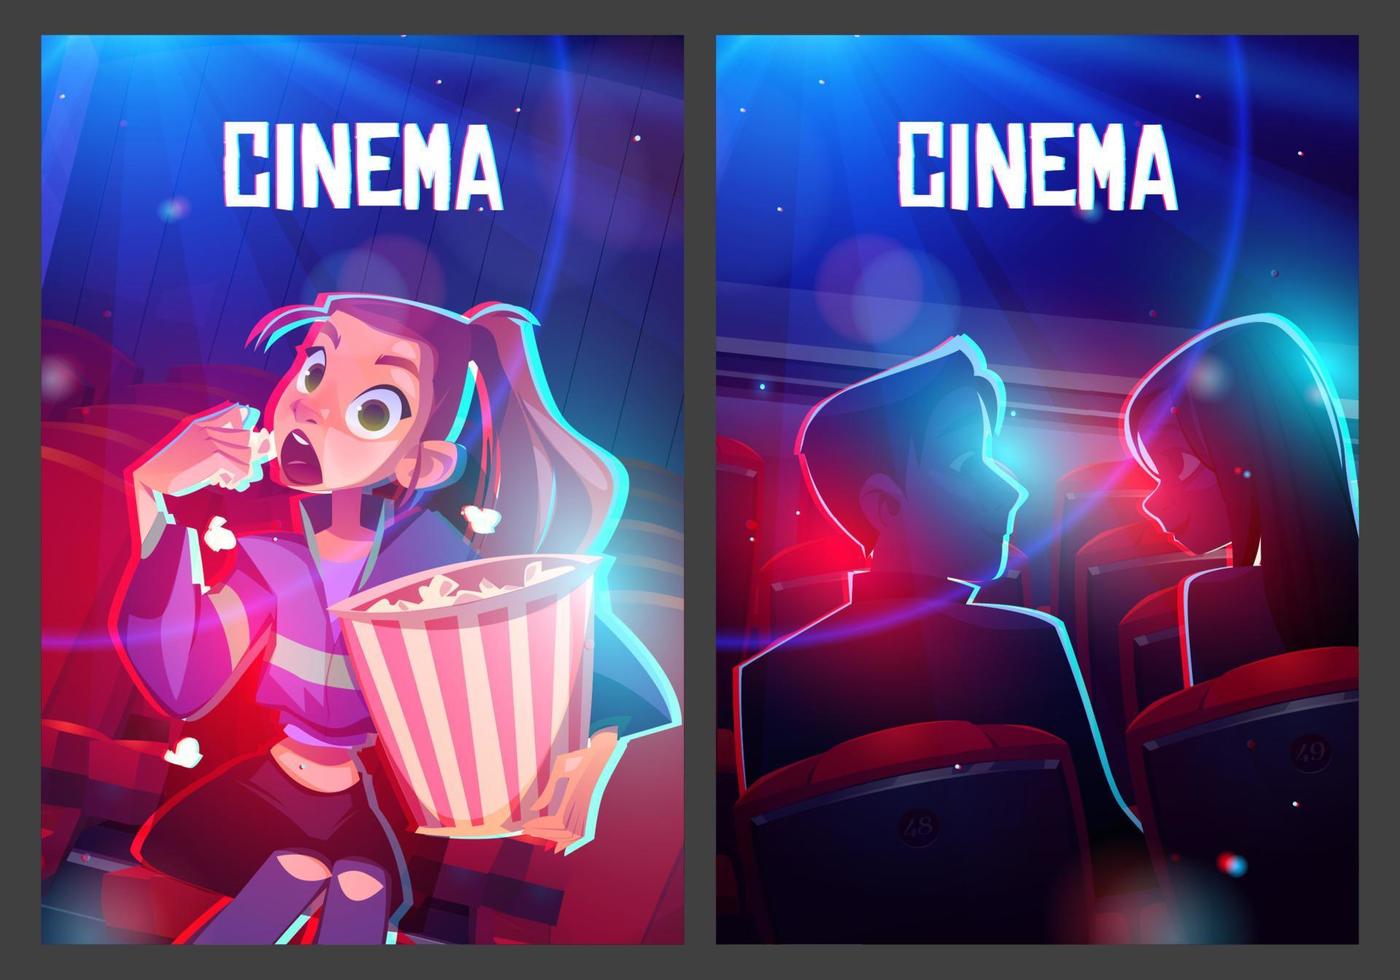 Cinema posters with audience in movie theater hall vector